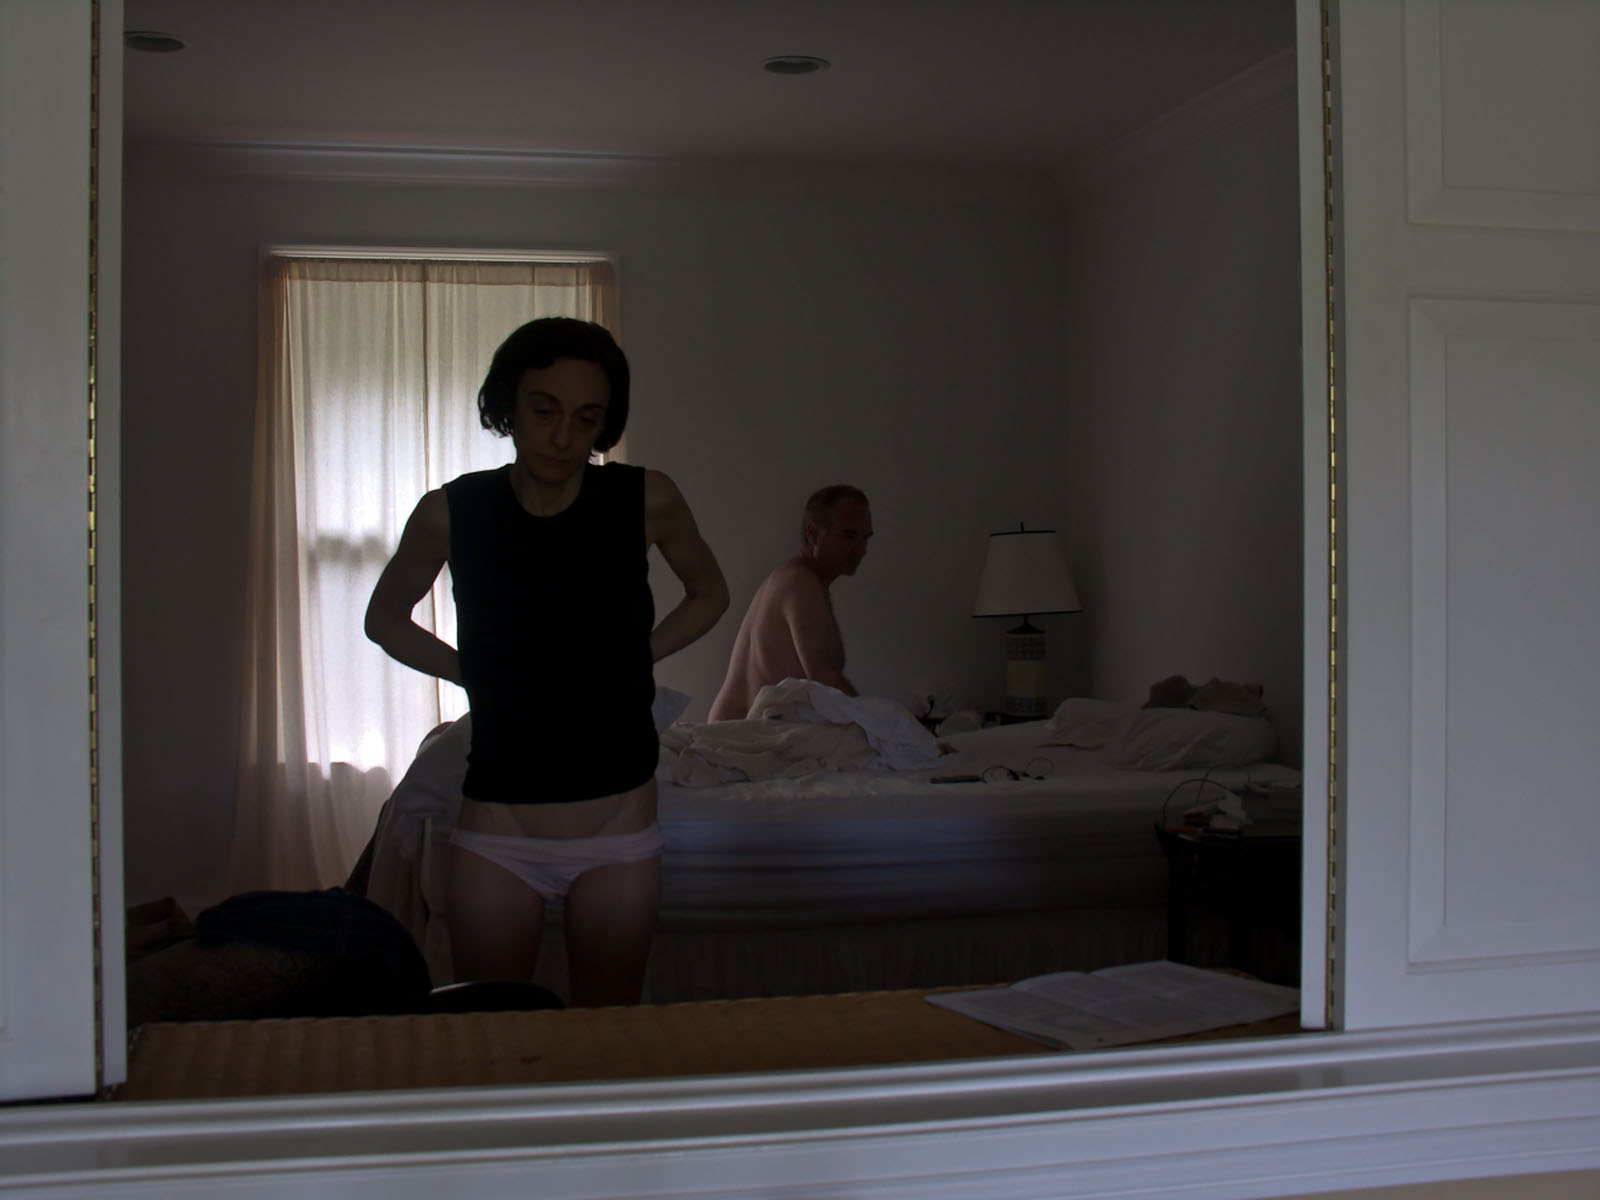 Scenes From a Life: Intimate Couples, In the Bedroom Window